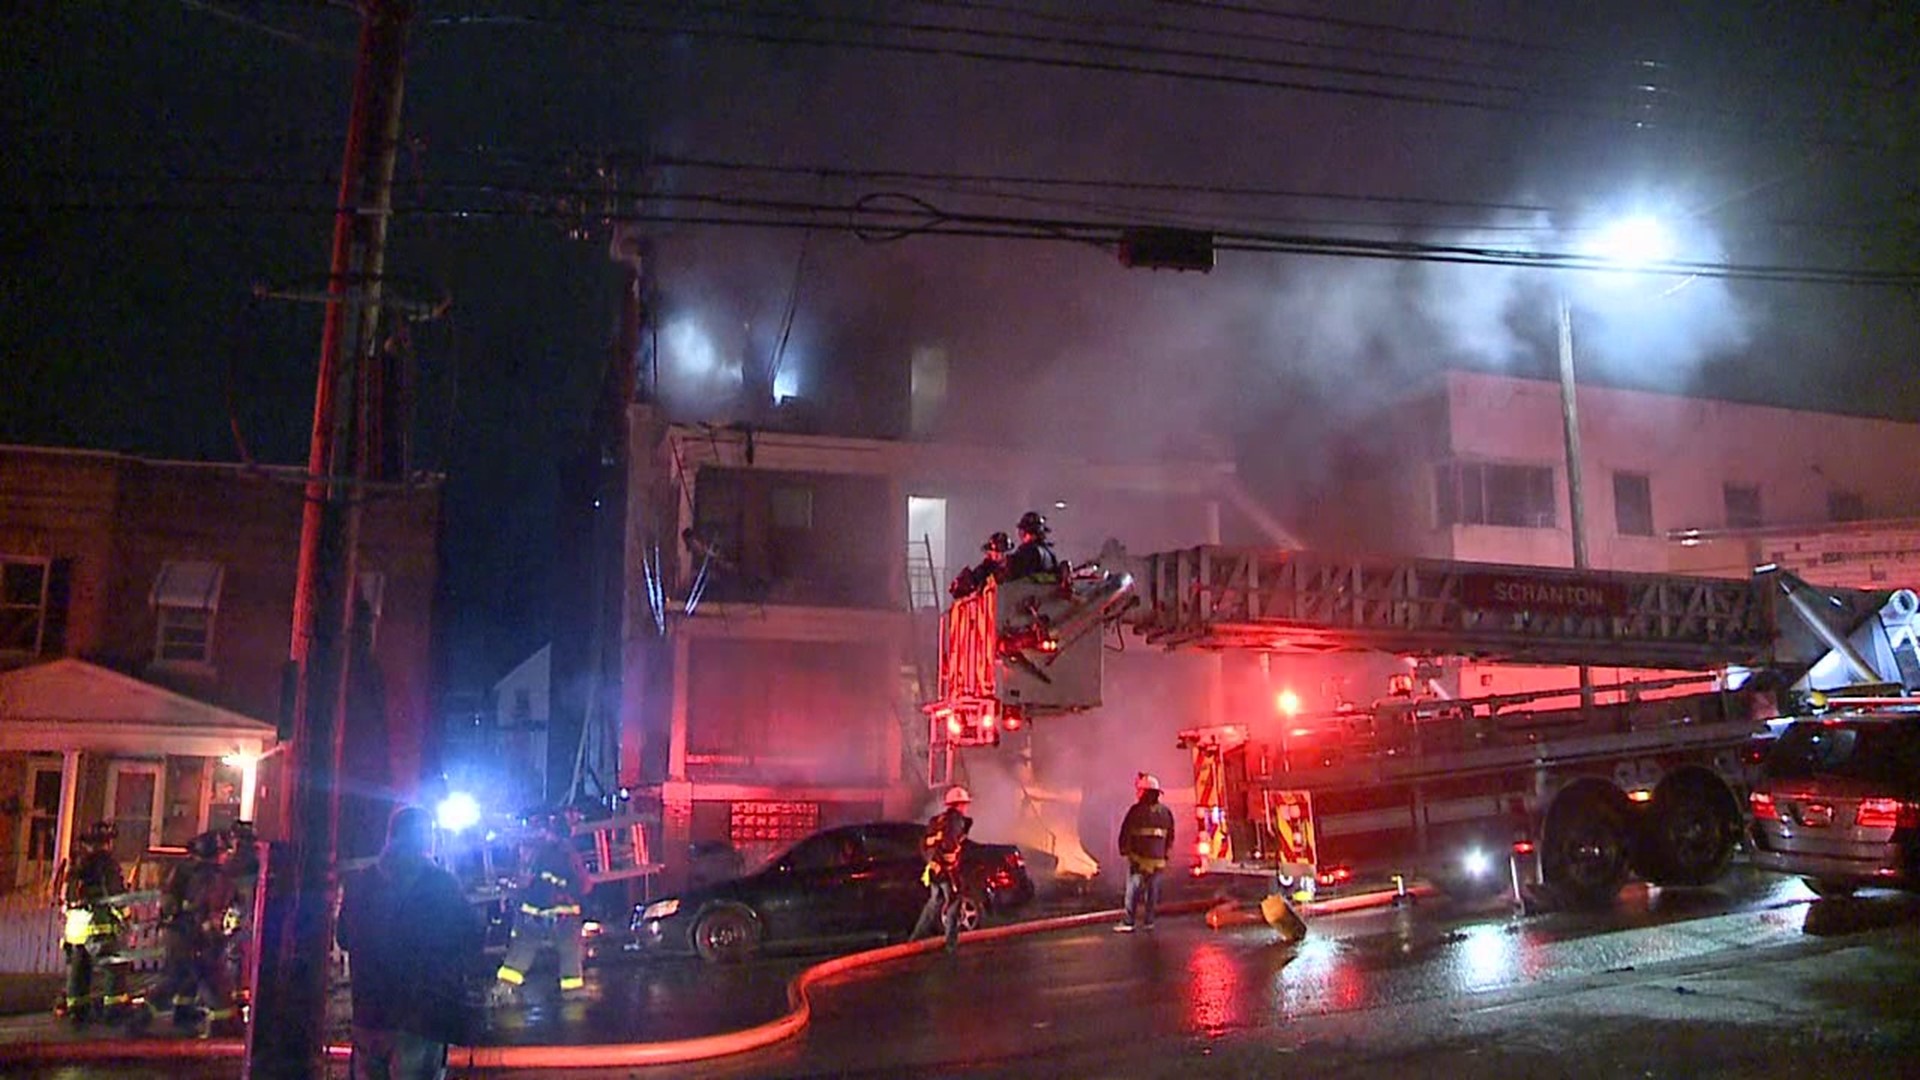 Flames broke out around 9:30 p.m. along Prescott avenue in the city's Hill section.